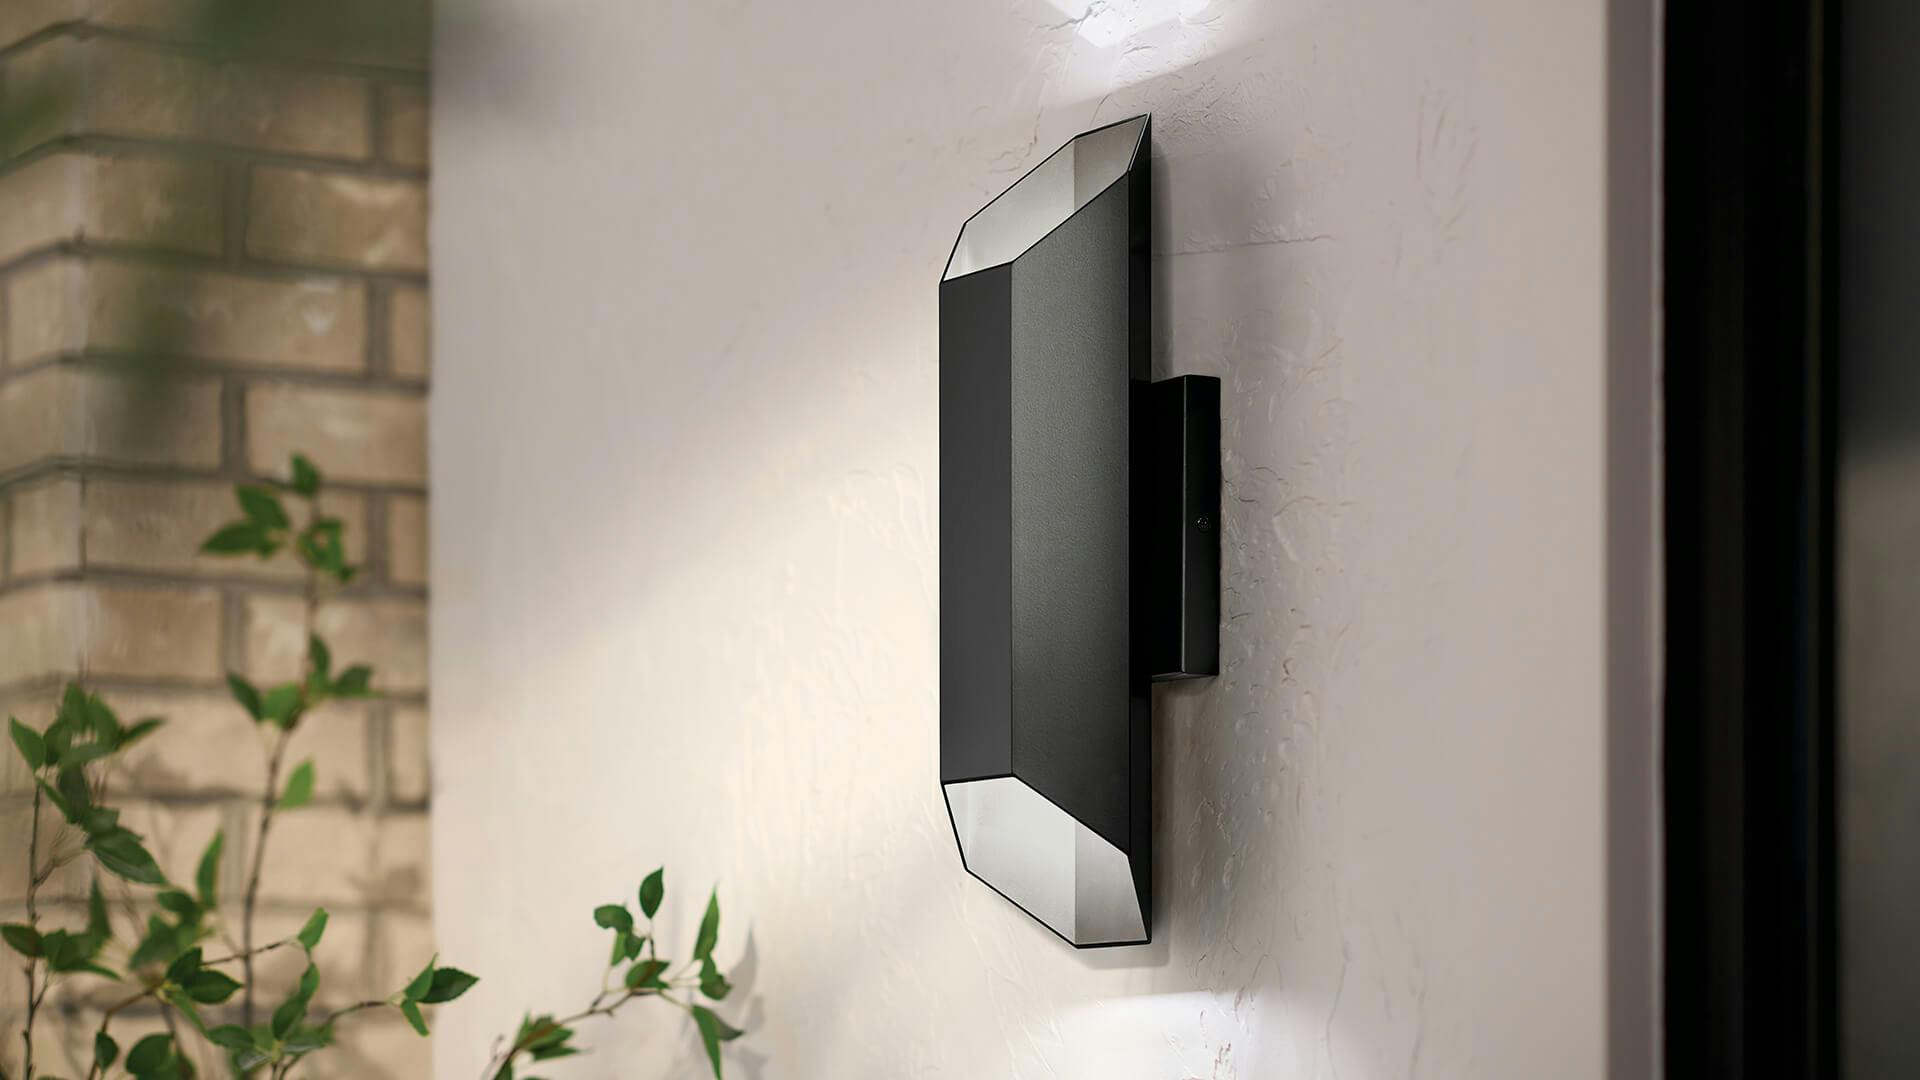 Estella sconce in black finish close up on an exterior wall